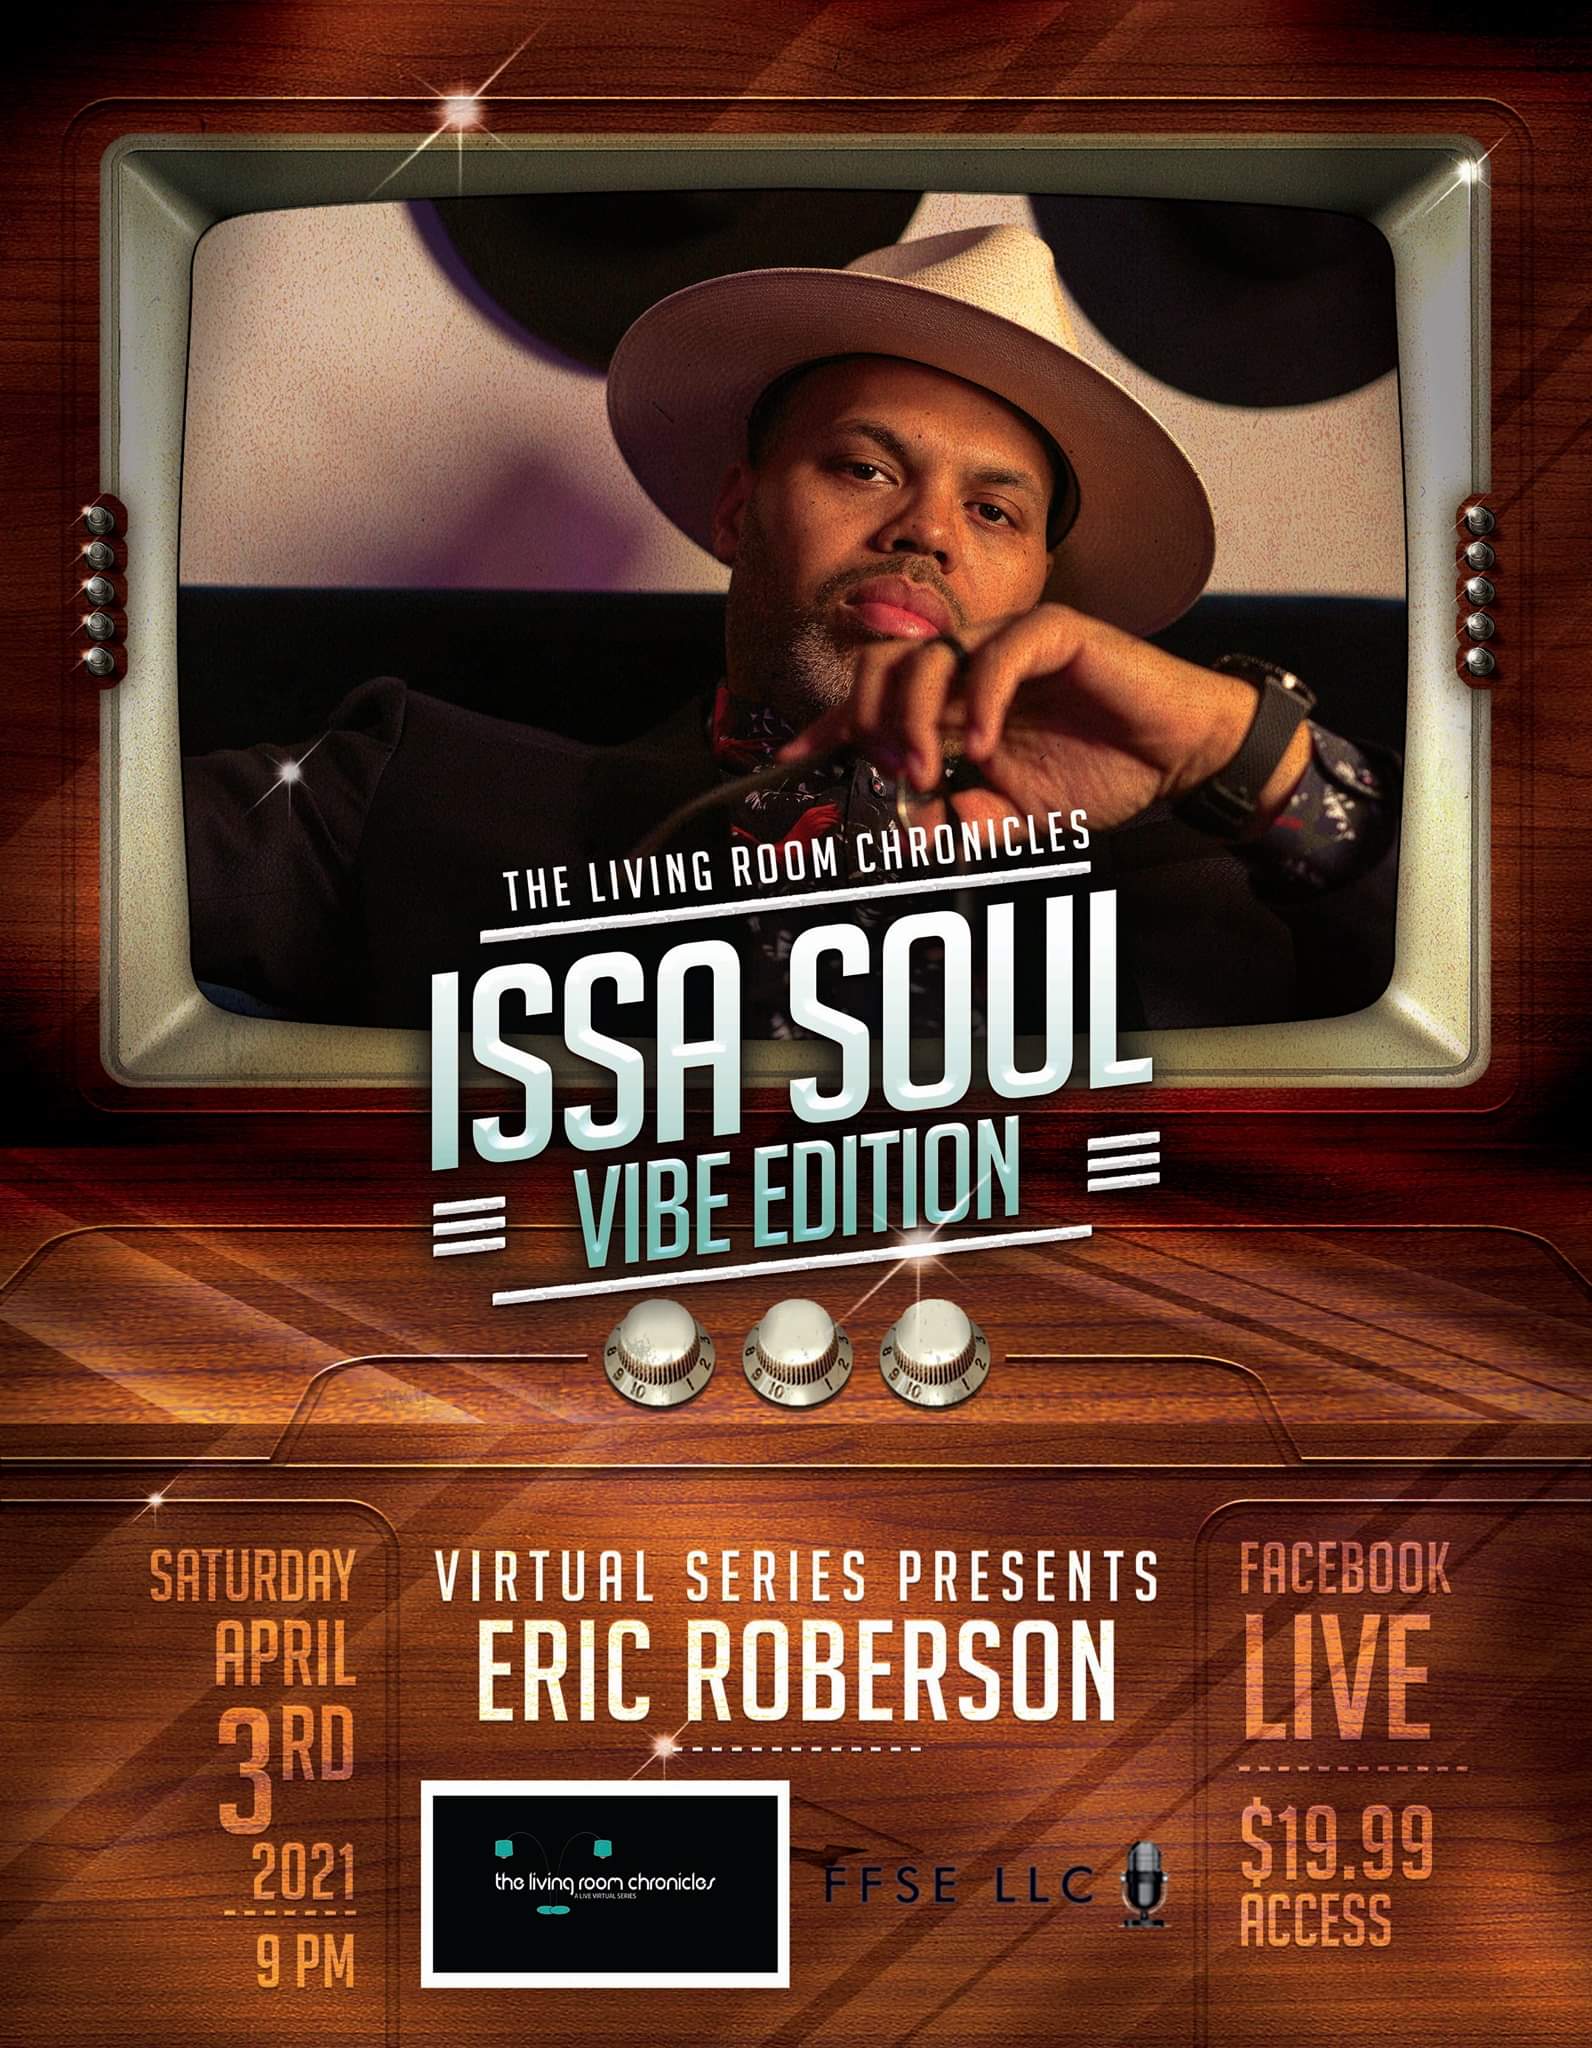 Eric Roberson Interview King of Independent Soul, Eric Roberson is